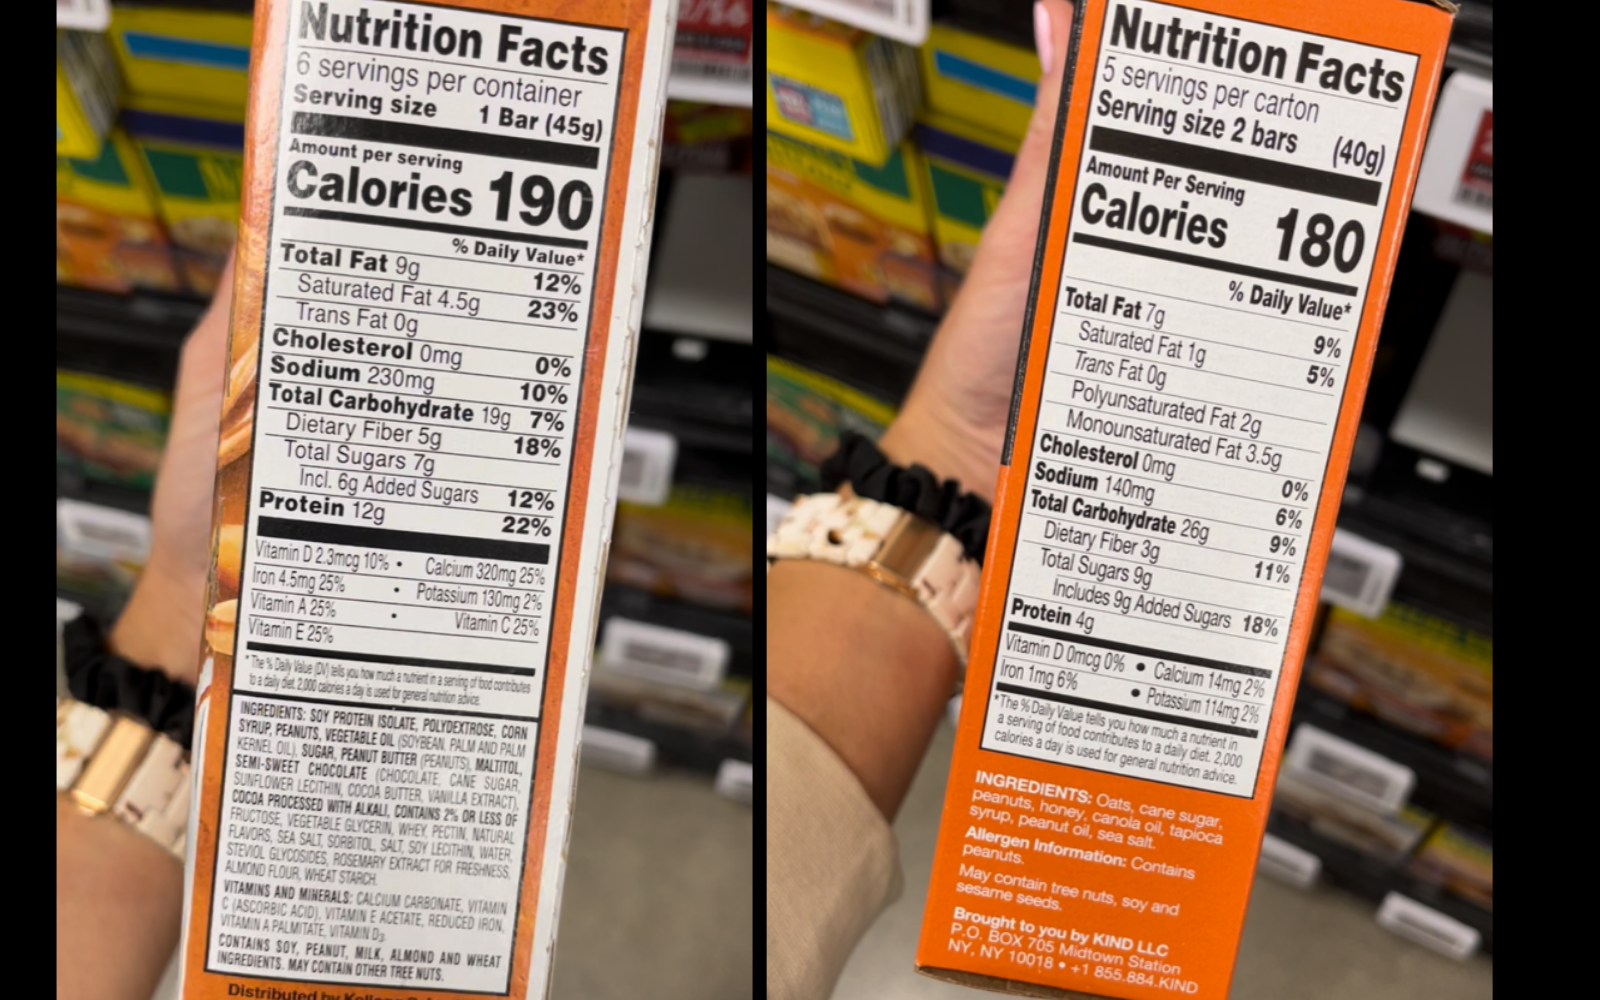 What's More Important?  Nutrition Facts or Ingredients?